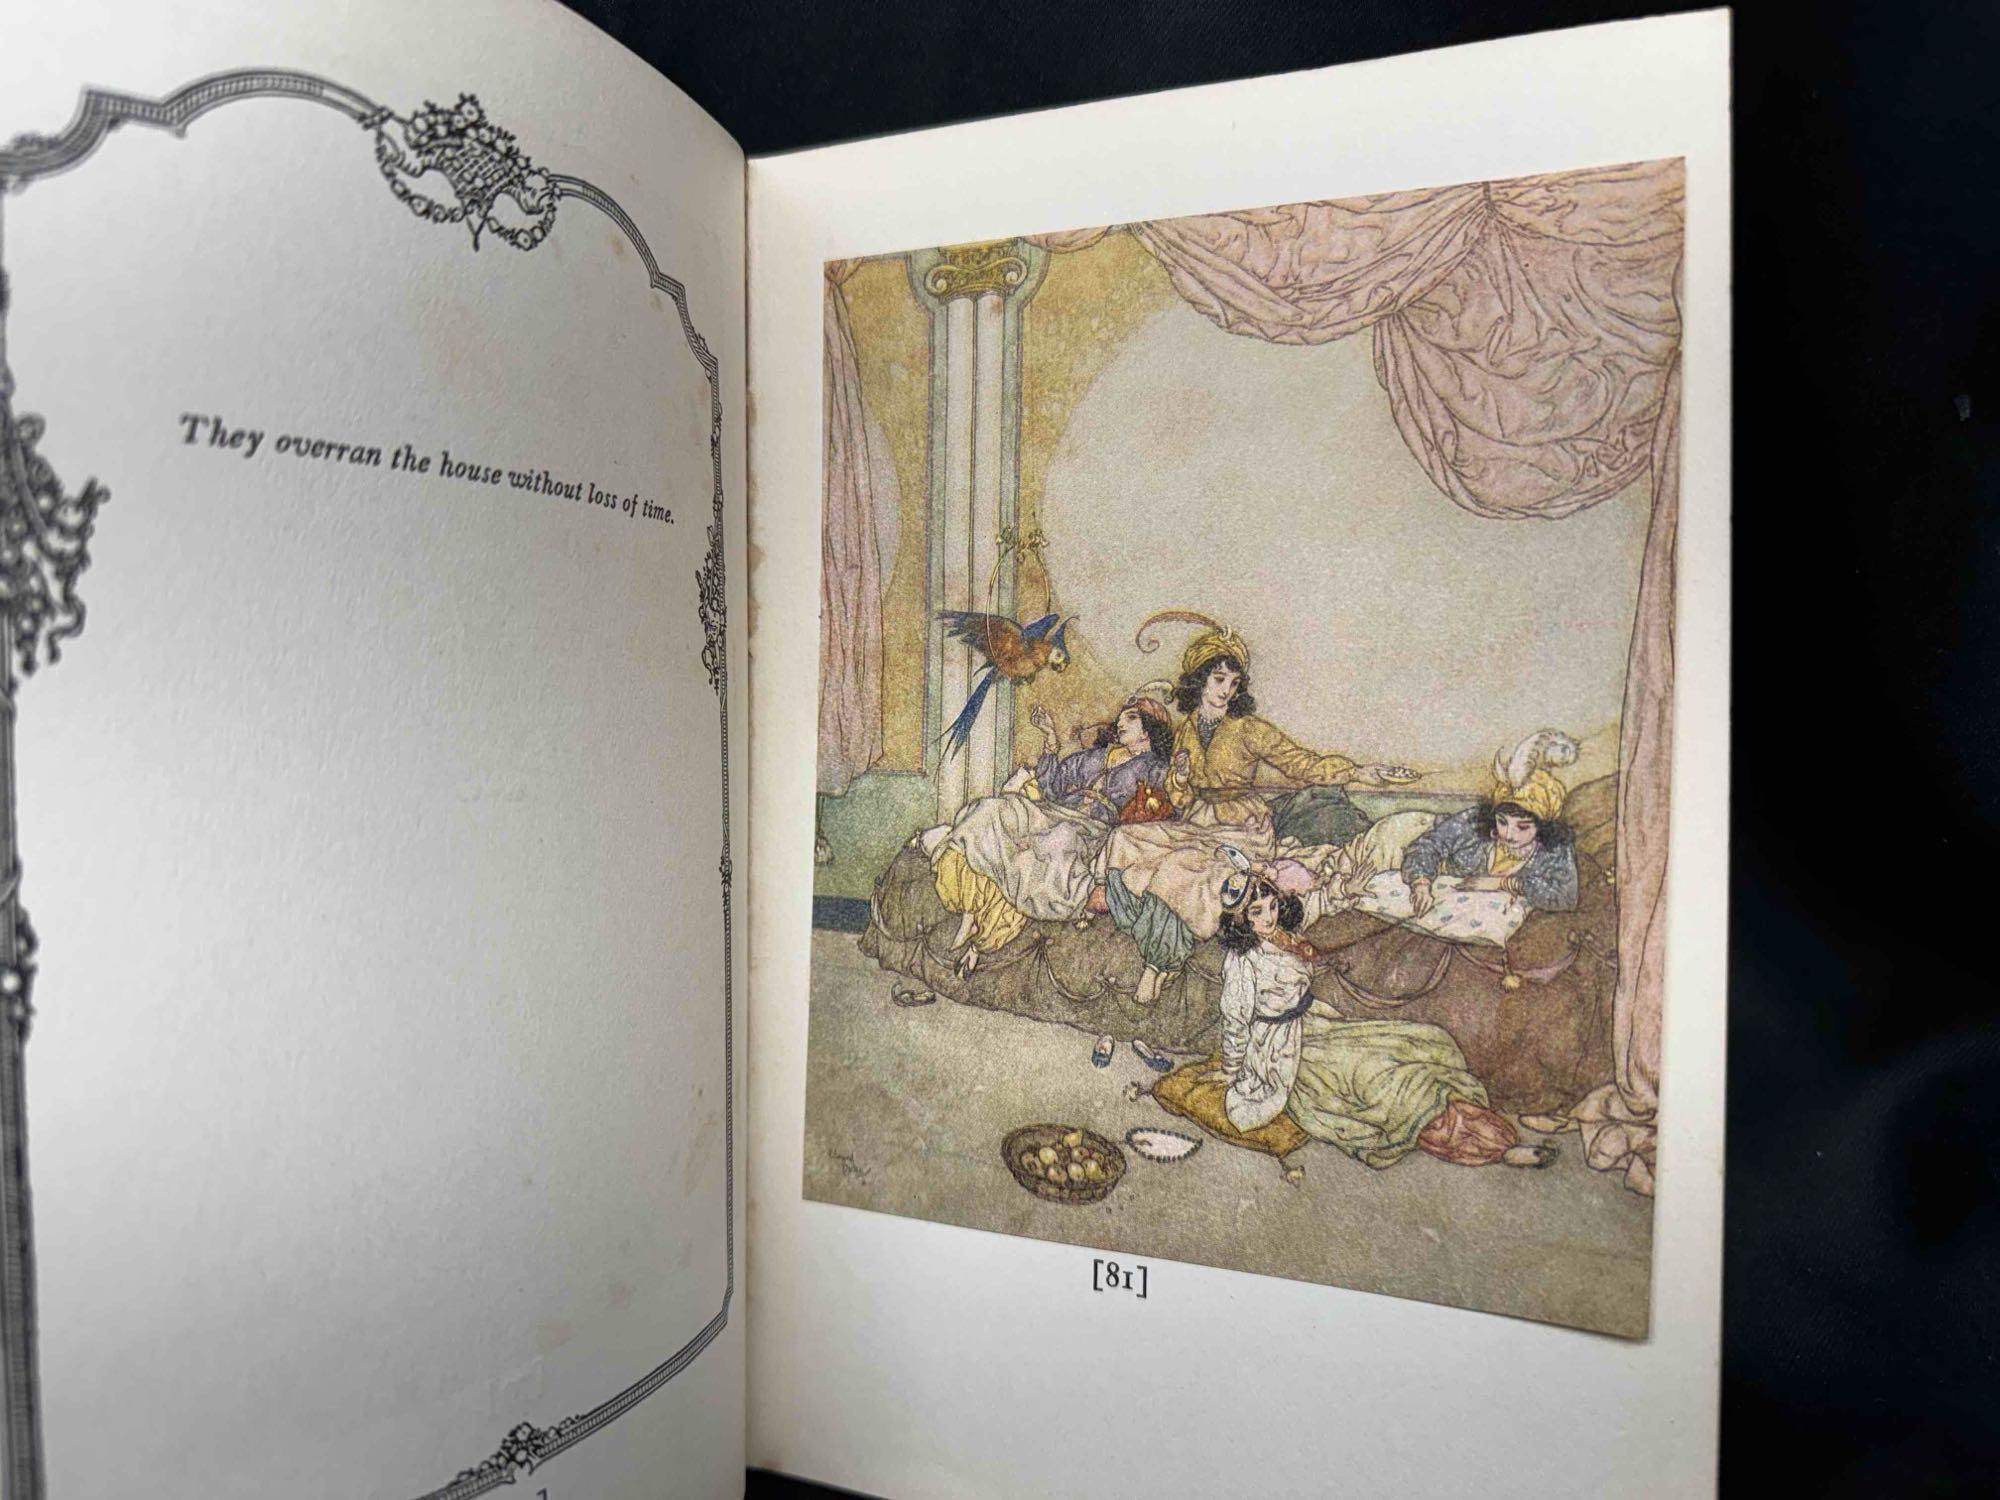 The Sleeping Beauty and Other Fairy Tales From the Old French, Retold by A.T. Quiller-Couch,